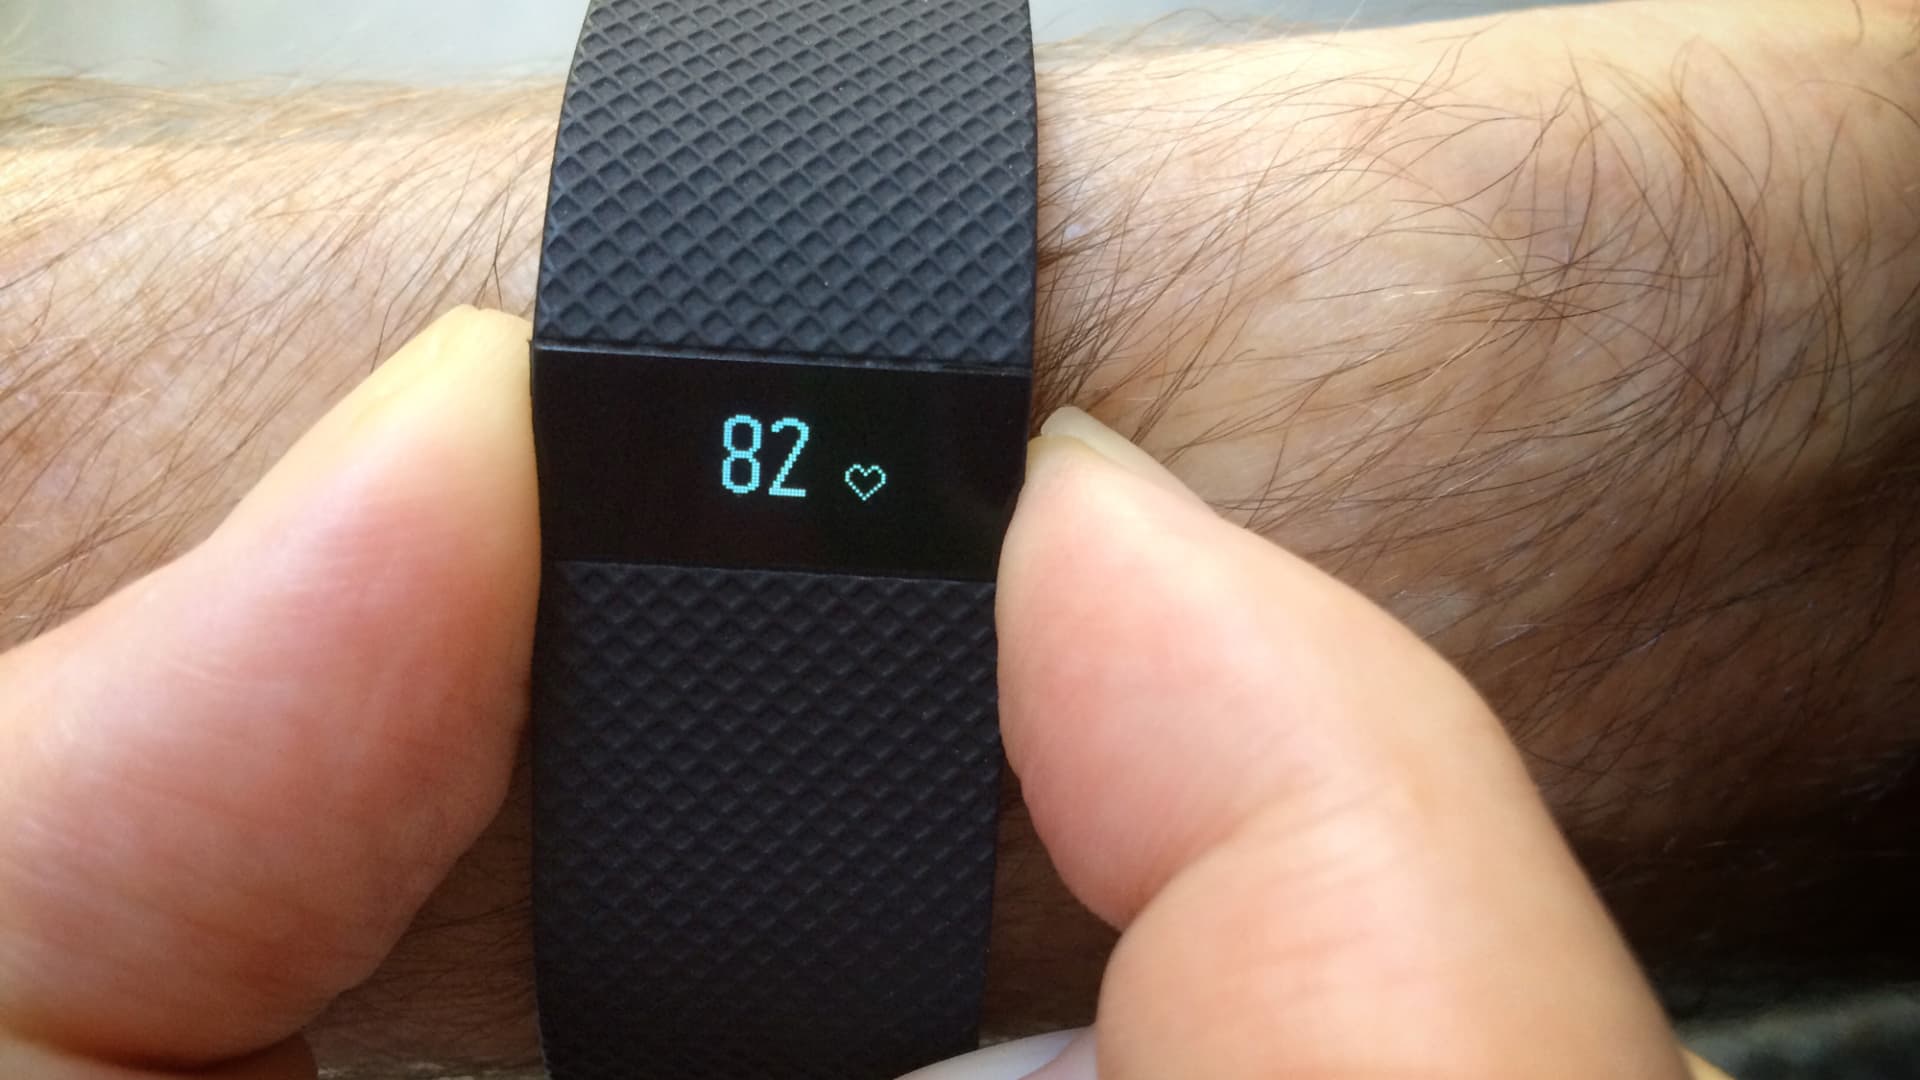 Study shows Fitbit trackers 'highly inaccurate